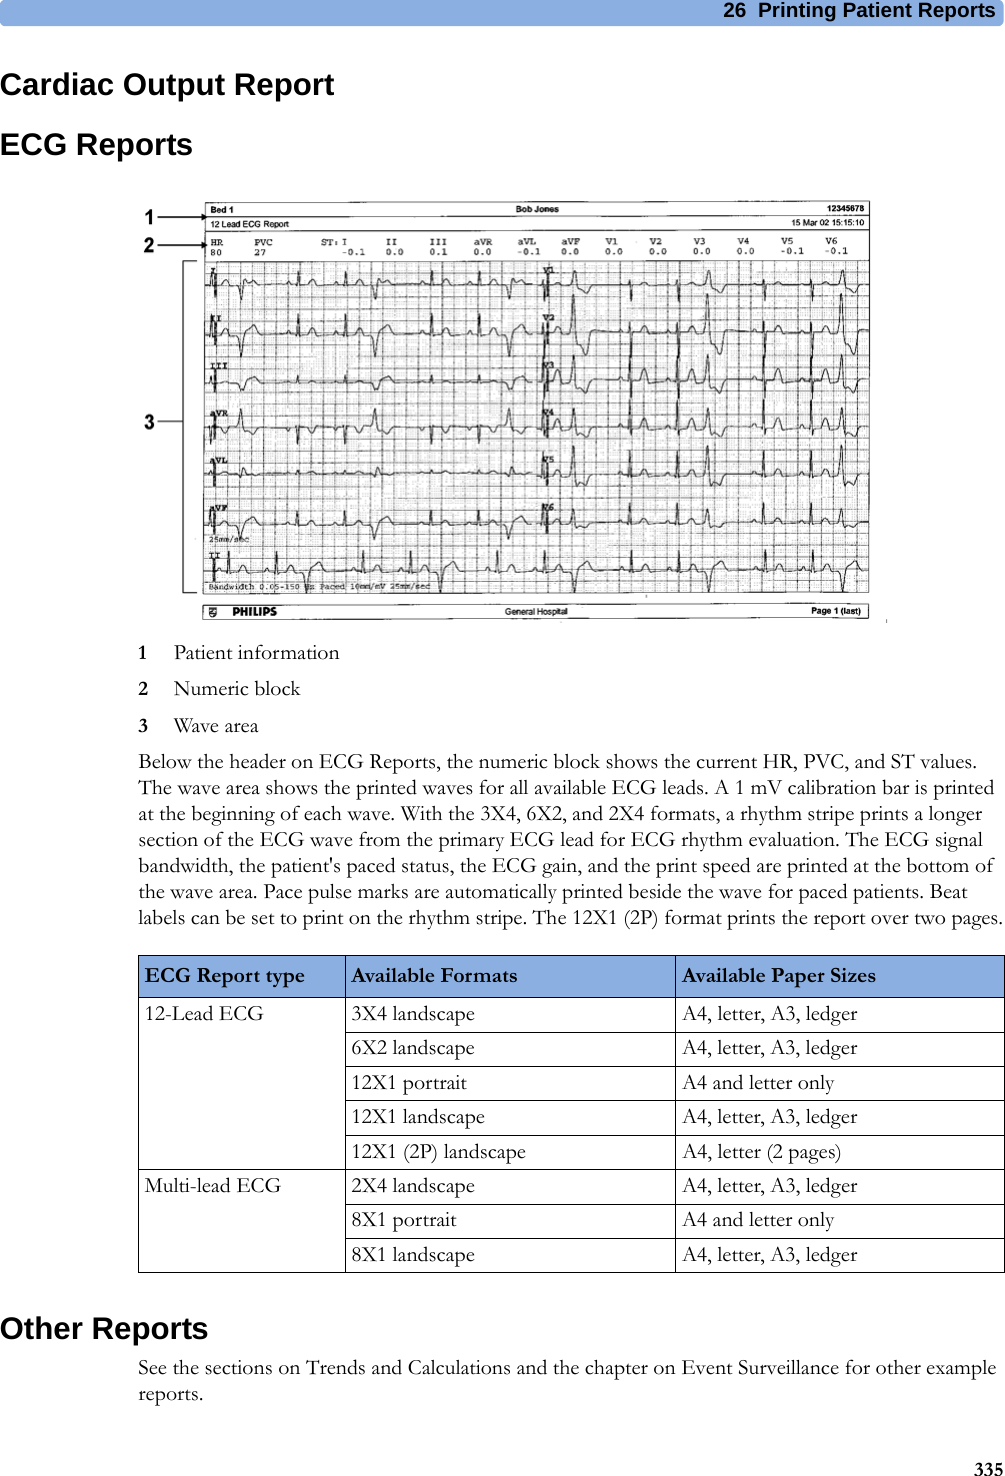 26 Printing Patient Reports335Cardiac Output ReportECG Reports1Patient information2Numeric block3Wave areaBelow the header on ECG Reports, the numeric block shows the current HR, PVC, and ST values. The wave area shows the printed waves for all available ECG leads. A 1 mV calibration bar is printed at the beginning of each wave. With the 3X4, 6X2, and 2X4 formats, a rhythm stripe prints a longer section of the ECG wave from the primary ECG lead for ECG rhythm evaluation. The ECG signal bandwidth, the patient&apos;s paced status, the ECG gain, and the print speed are printed at the bottom of the wave area. Pace pulse marks are automatically printed beside the wave for paced patients. Beat labels can be set to print on the rhythm stripe. The 12X1 (2P) format prints the report over two pages.Other ReportsSee the sections on Trends and Calculations and the chapter on Event Surveillance for other example reports.ECG Report type Available Formats Available Paper Sizes12-Lead ECG 3X4 landscape A4, letter, A3, ledger6X2 landscape A4, letter, A3, ledger12X1 portrait A4 and letter only12X1 landscape A4, letter, A3, ledger12X1 (2P) landscape A4, letter (2 pages)Multi-lead ECG 2X4 landscape A4, letter, A3, ledger8X1 portrait A4 and letter only8X1 landscape A4, letter, A3, ledger